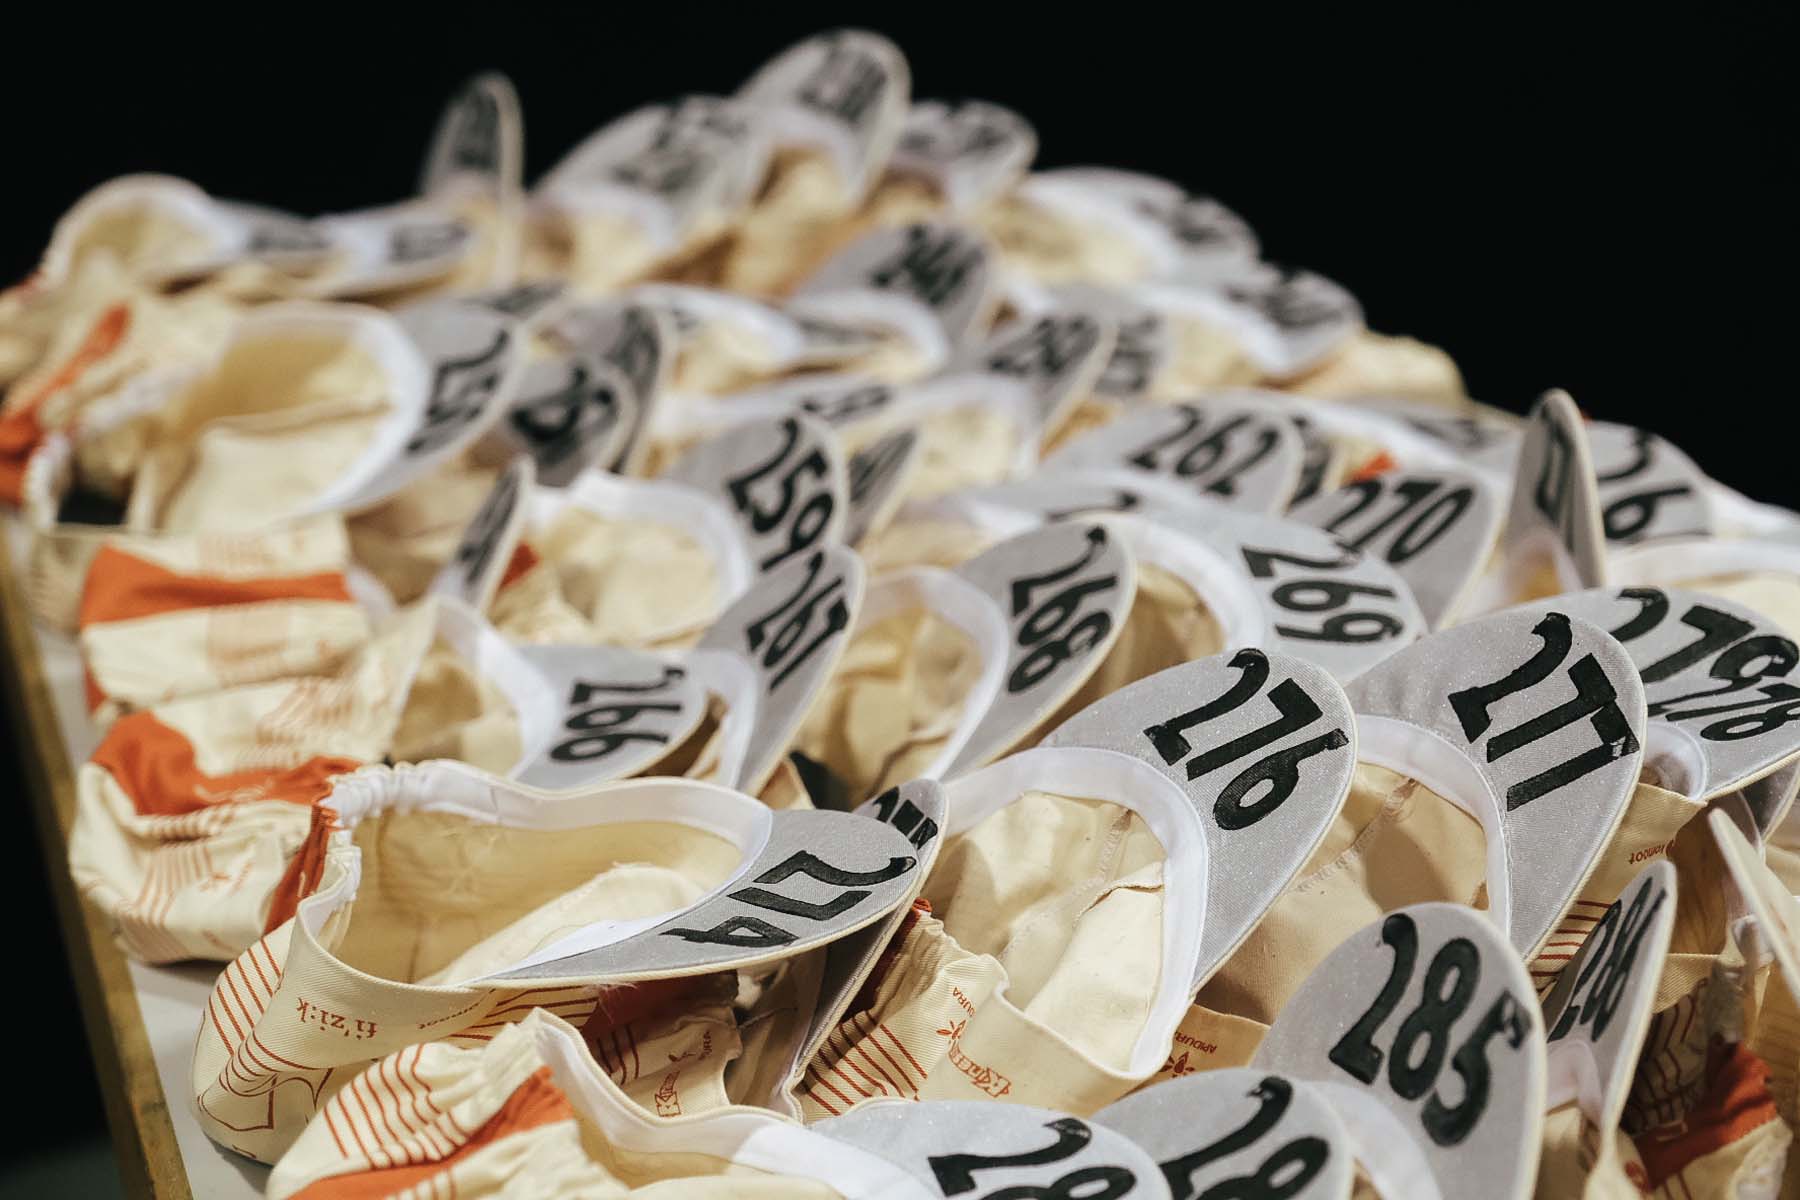 Caps with rider numbers at the Transcontinental Race